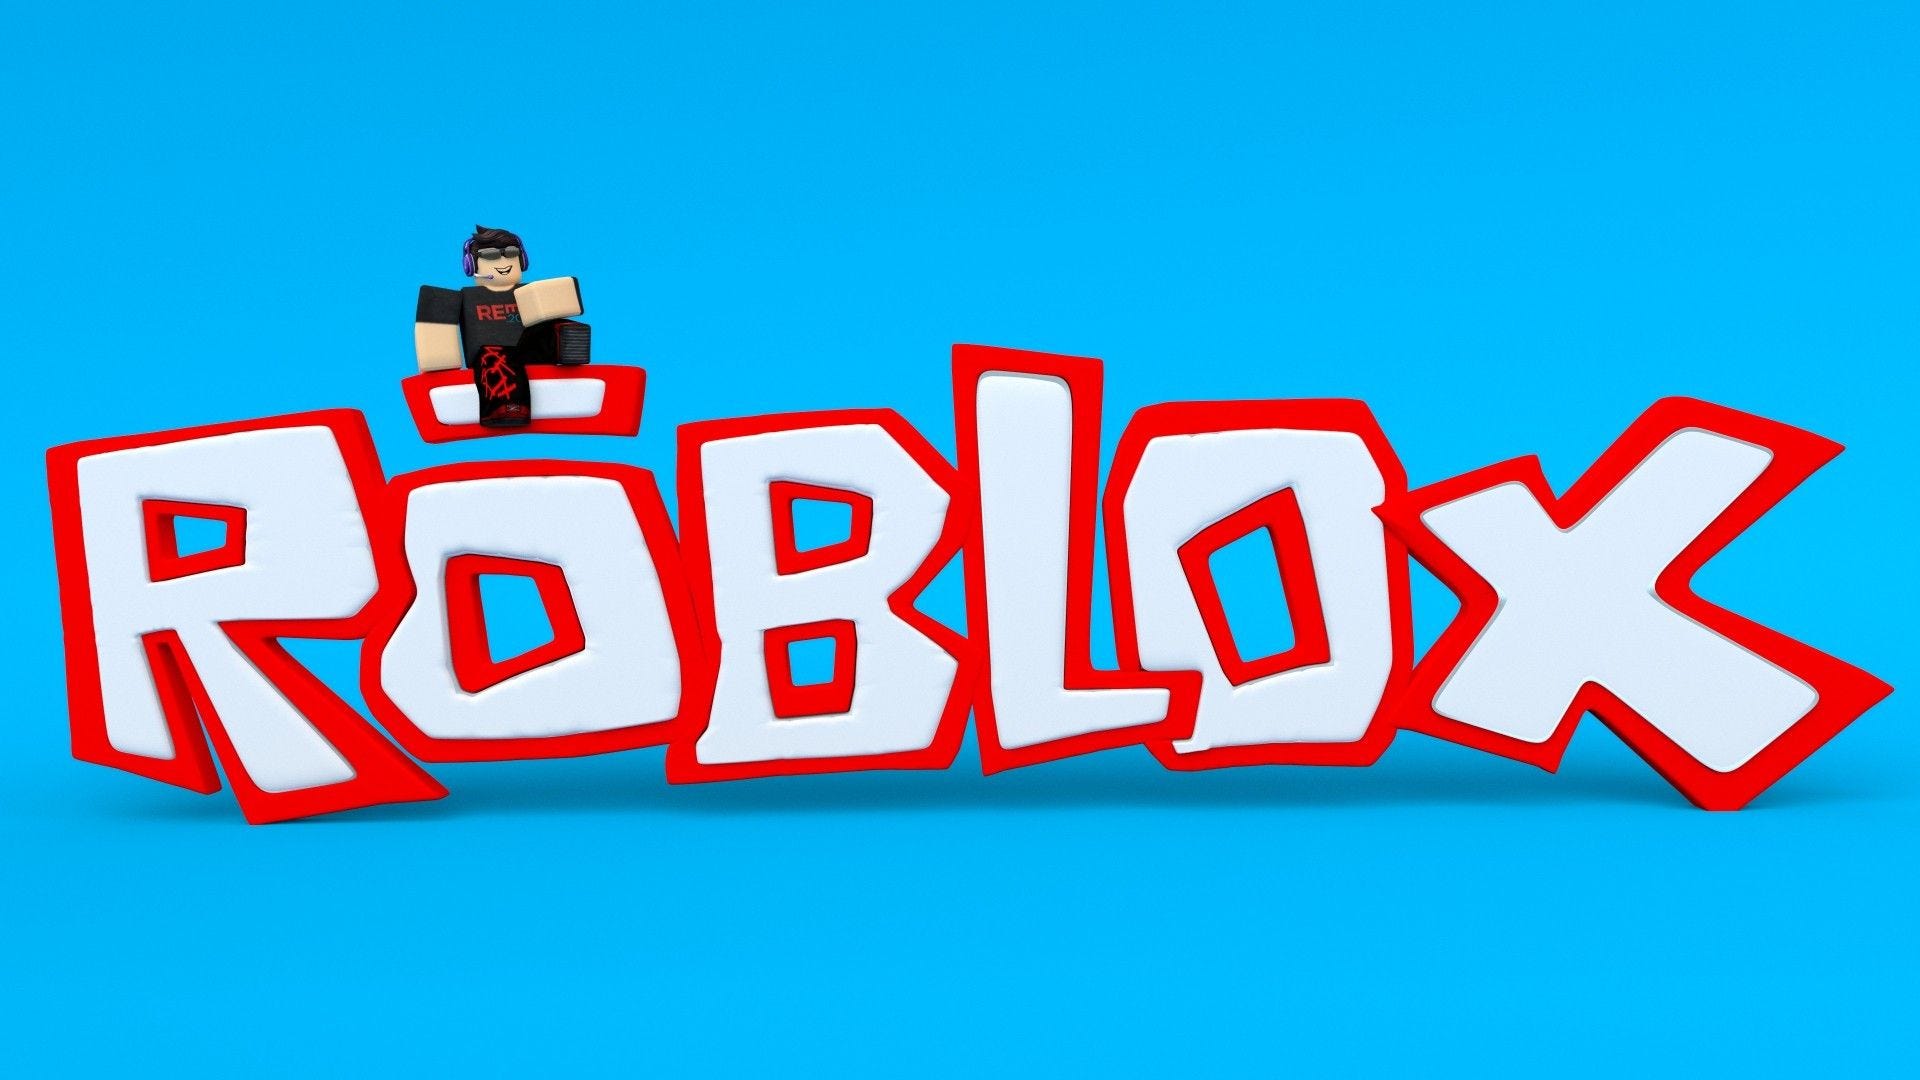 Roblox Free Robux Generator 2020 No Survey By Bennettcrane Sep 2020 Medium - free robux generator without verify now